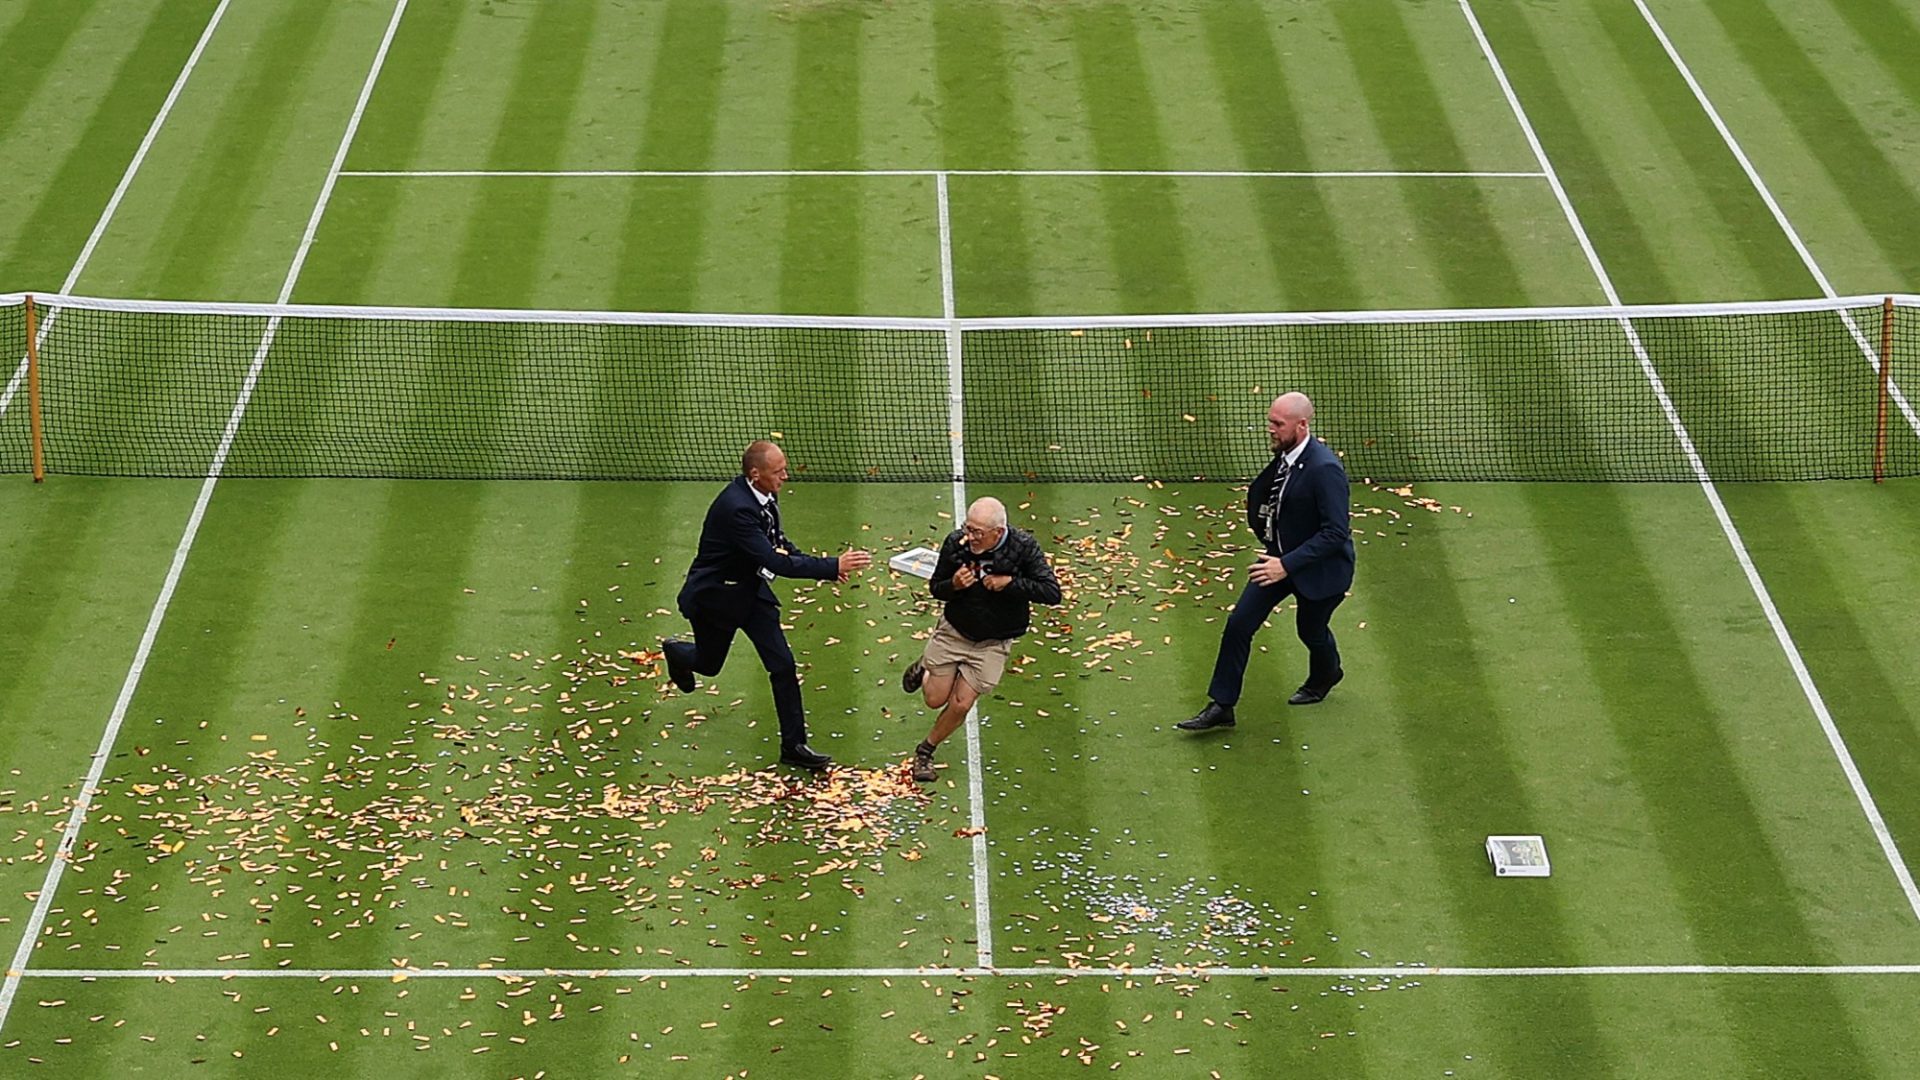 A JSO protester is challenged by security on court 18 at Wimbledon in London, 2023. Photo: Julian Finney/Getty